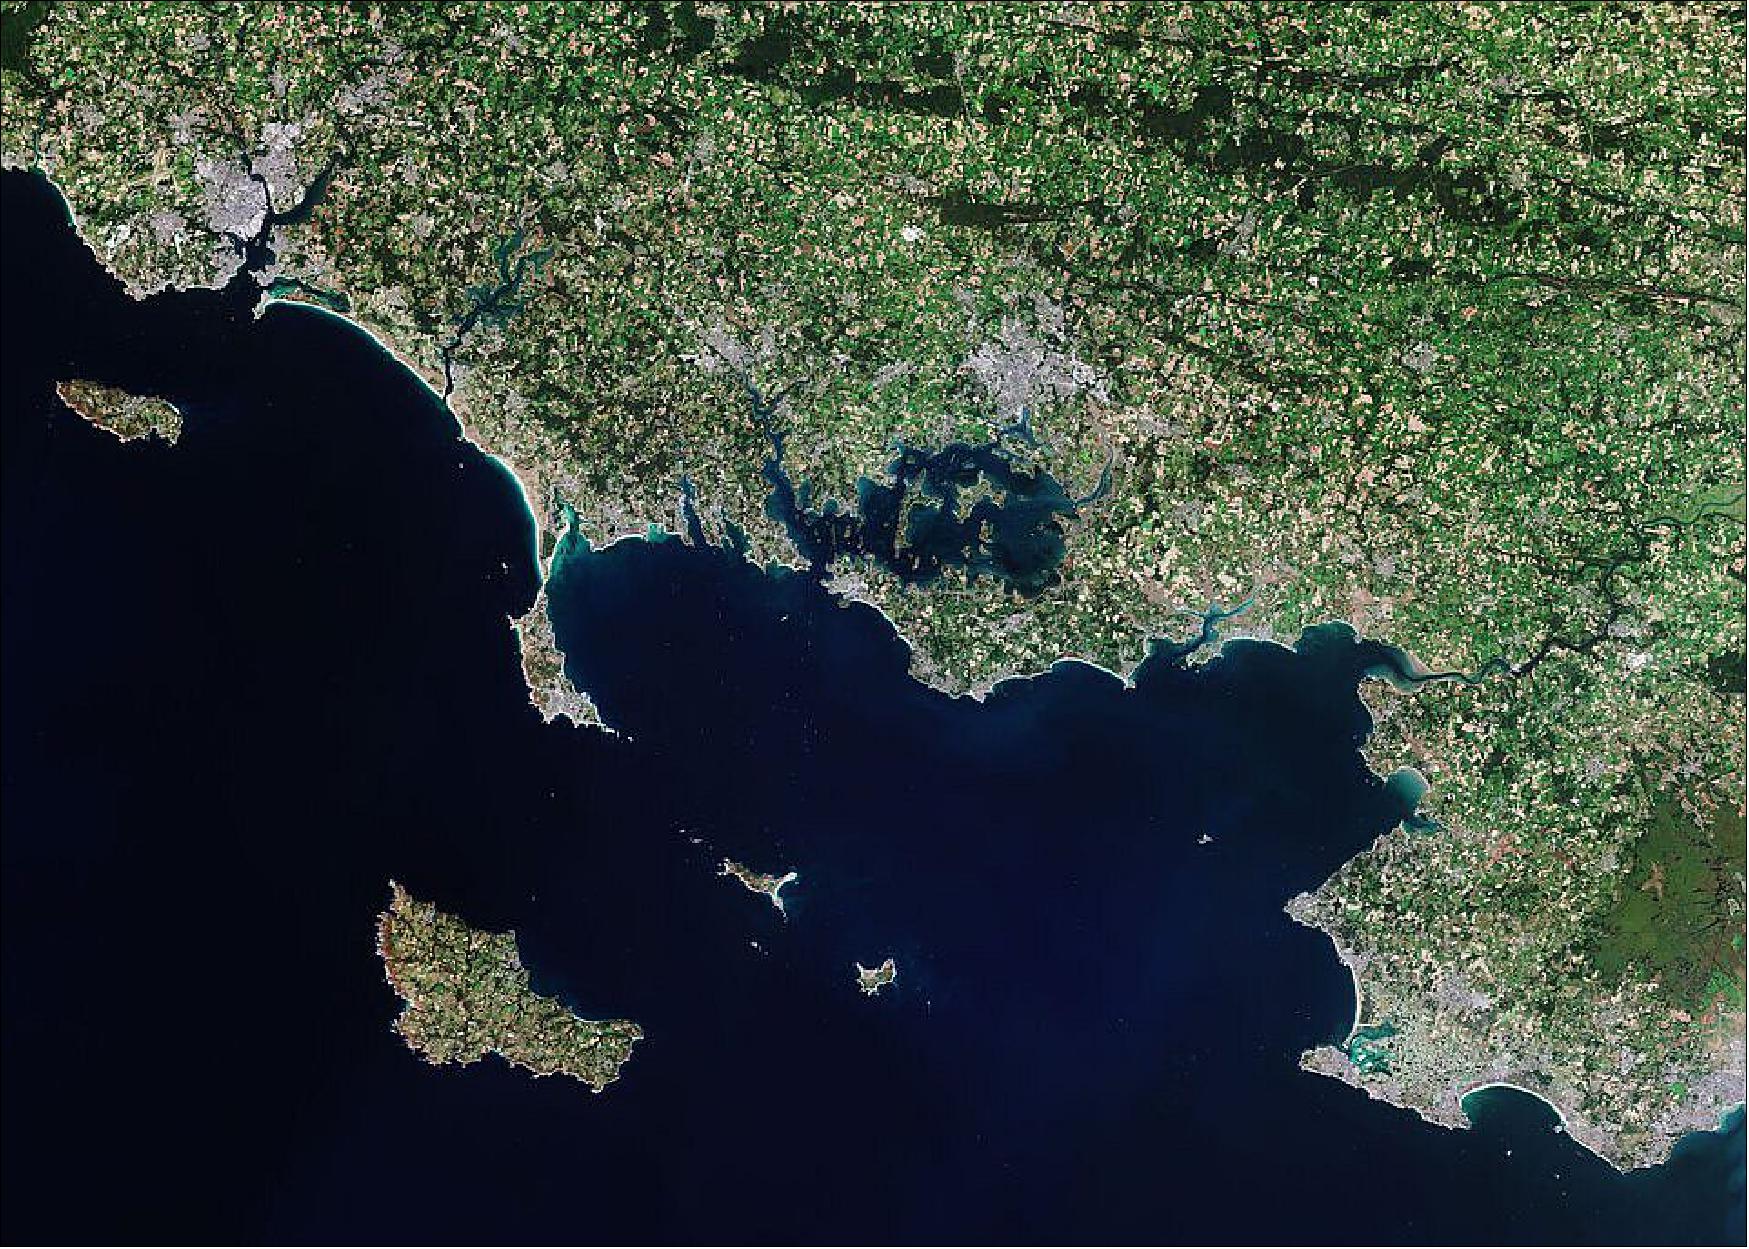 Figure 49: Brittany is an important cultural region in the northwest of France and is divided into four departments: Ille-et-Vilaine in the east, Côtes d'Armor in the north, Finistère in the west and Morbihan in the south. This image is also featured on the Earth from Space video program. (image credit: ESA, the image contains modified Copernicus Sentinel data (2020), processed by ESA, CC BY-SA 3.0 IGO)